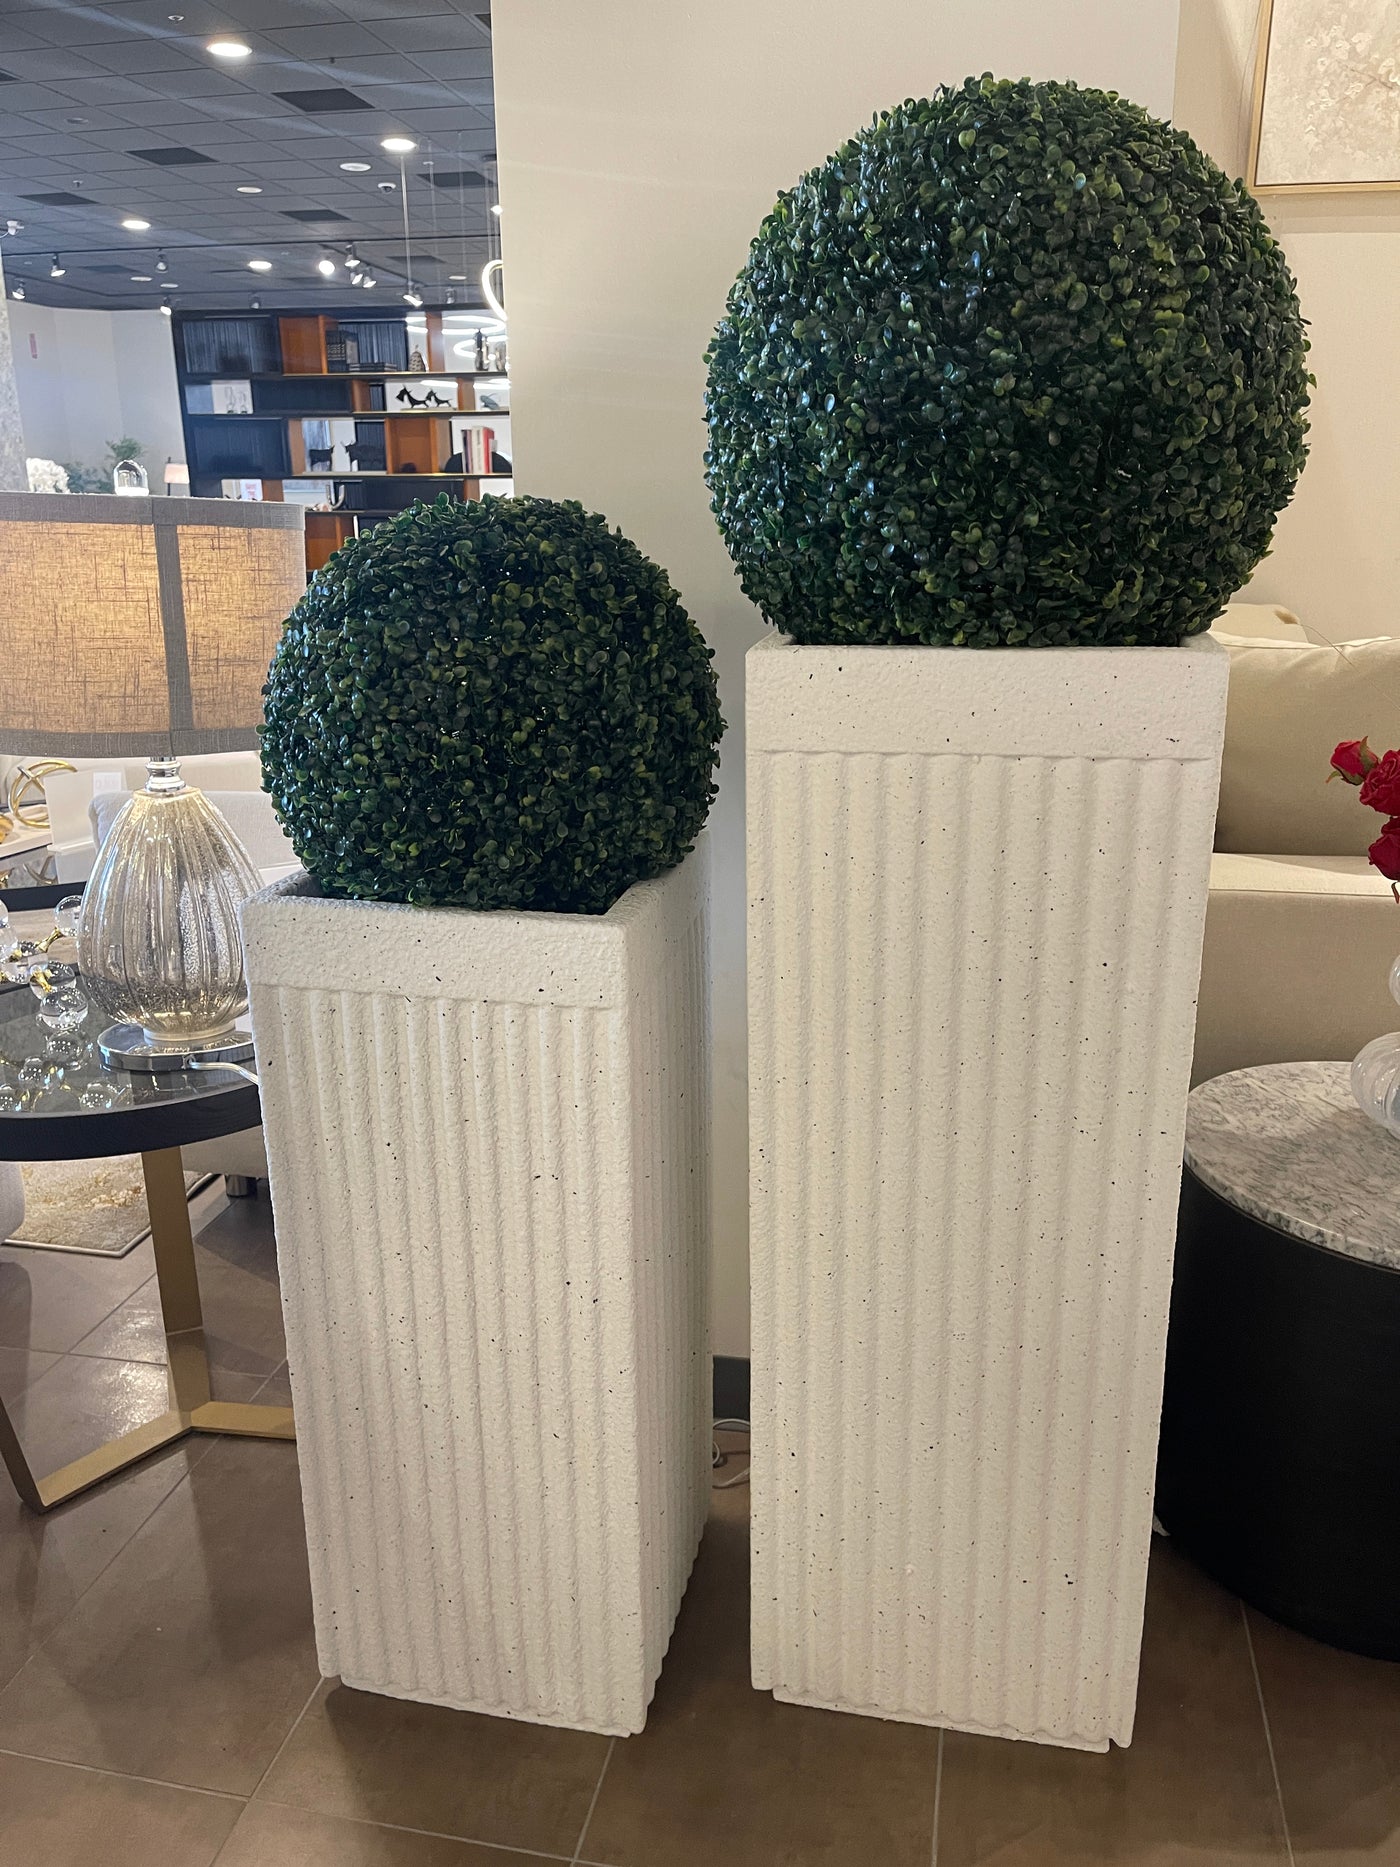 Textured Planter with stripes